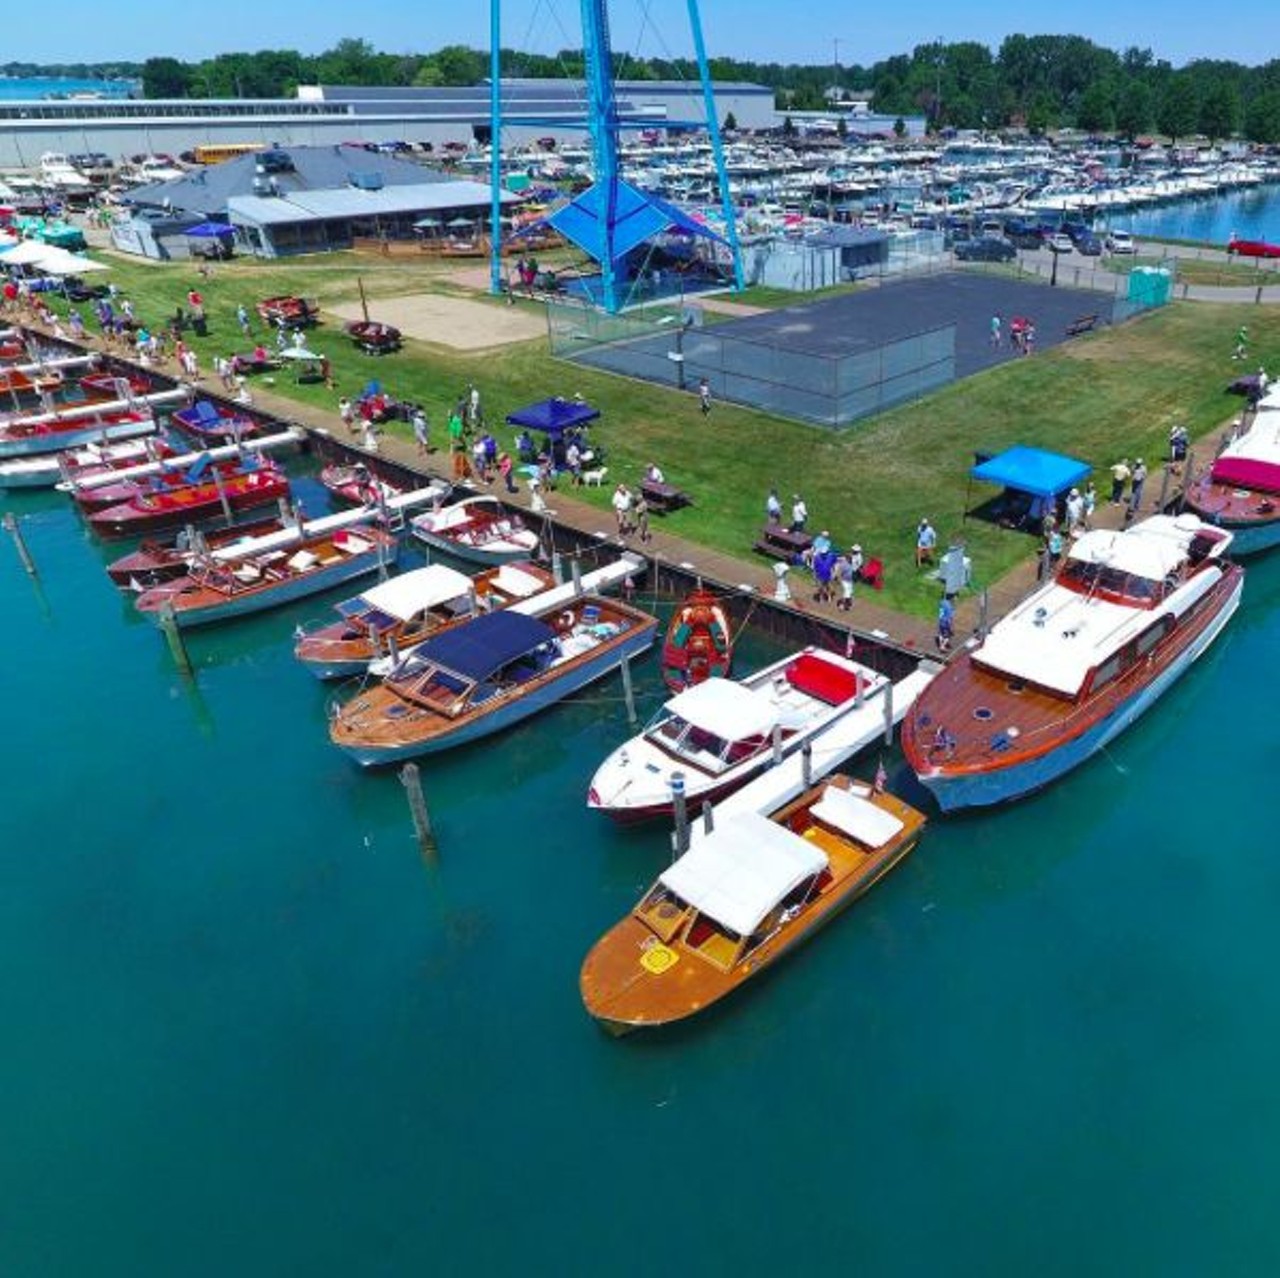 Algonac
What to do: Algonac is situated on the north shore on the Saint Clair River. If you have a boat, this is the perfect small town to visit. Dock your boat at the Algonac Harbour Club and enjoy all of the amenities that this town has to offer including unique shops, a boardwalk that lines the river and a state park just north of town. 
Photo via IG user @michiganacbs